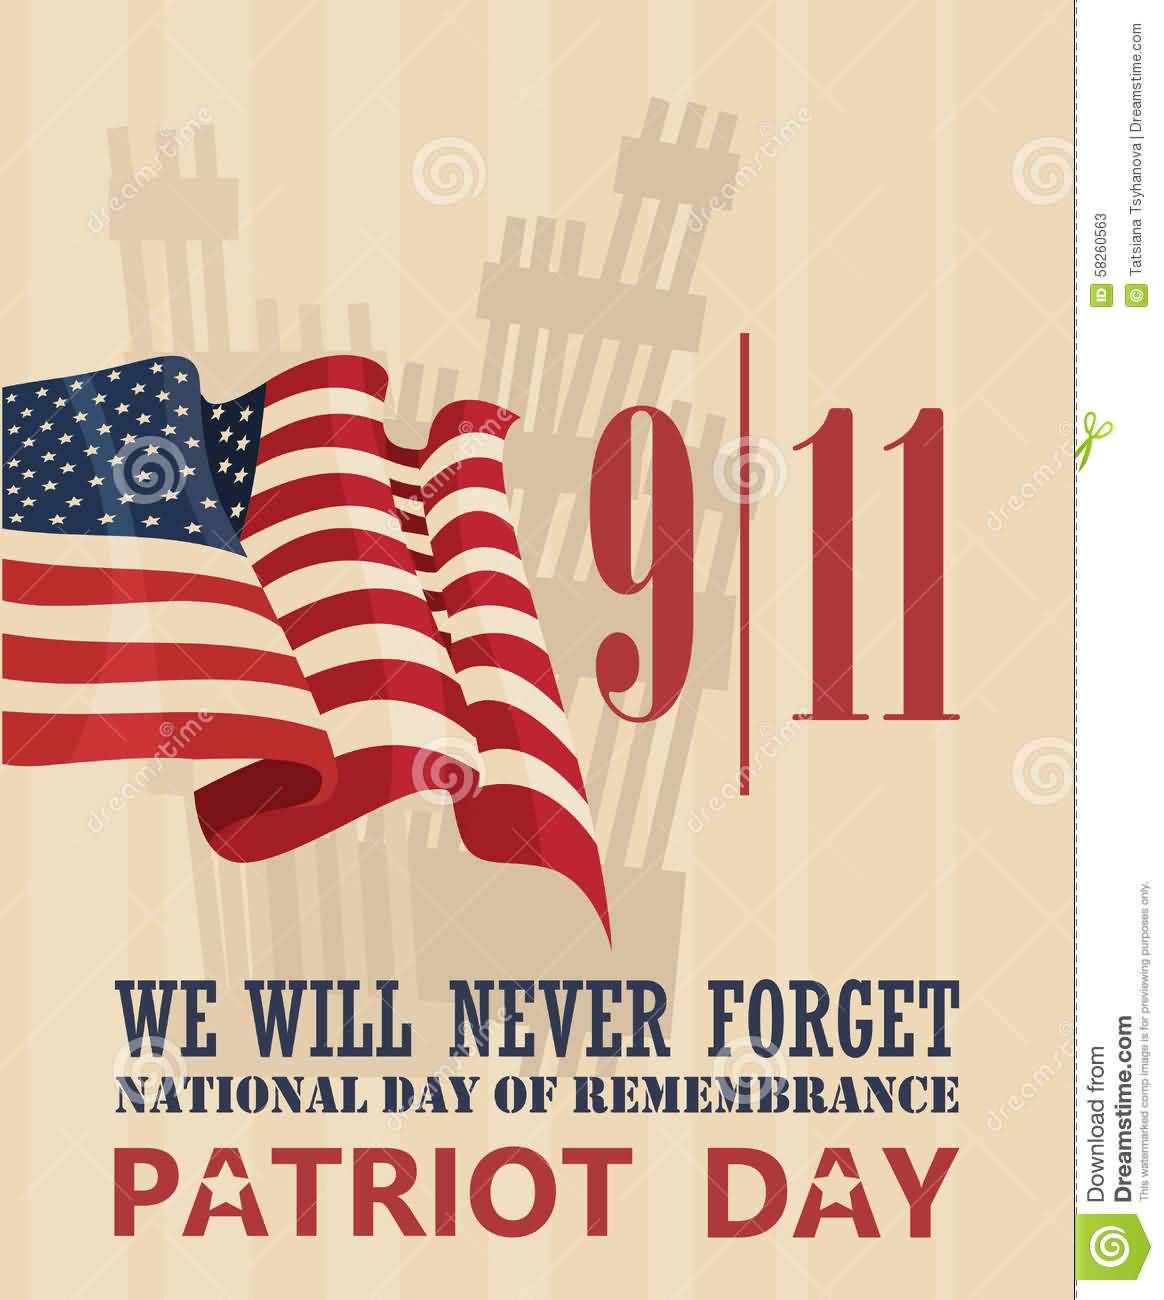 We Will Never Forget National Day Of Remembrance Patriot Day Illustration